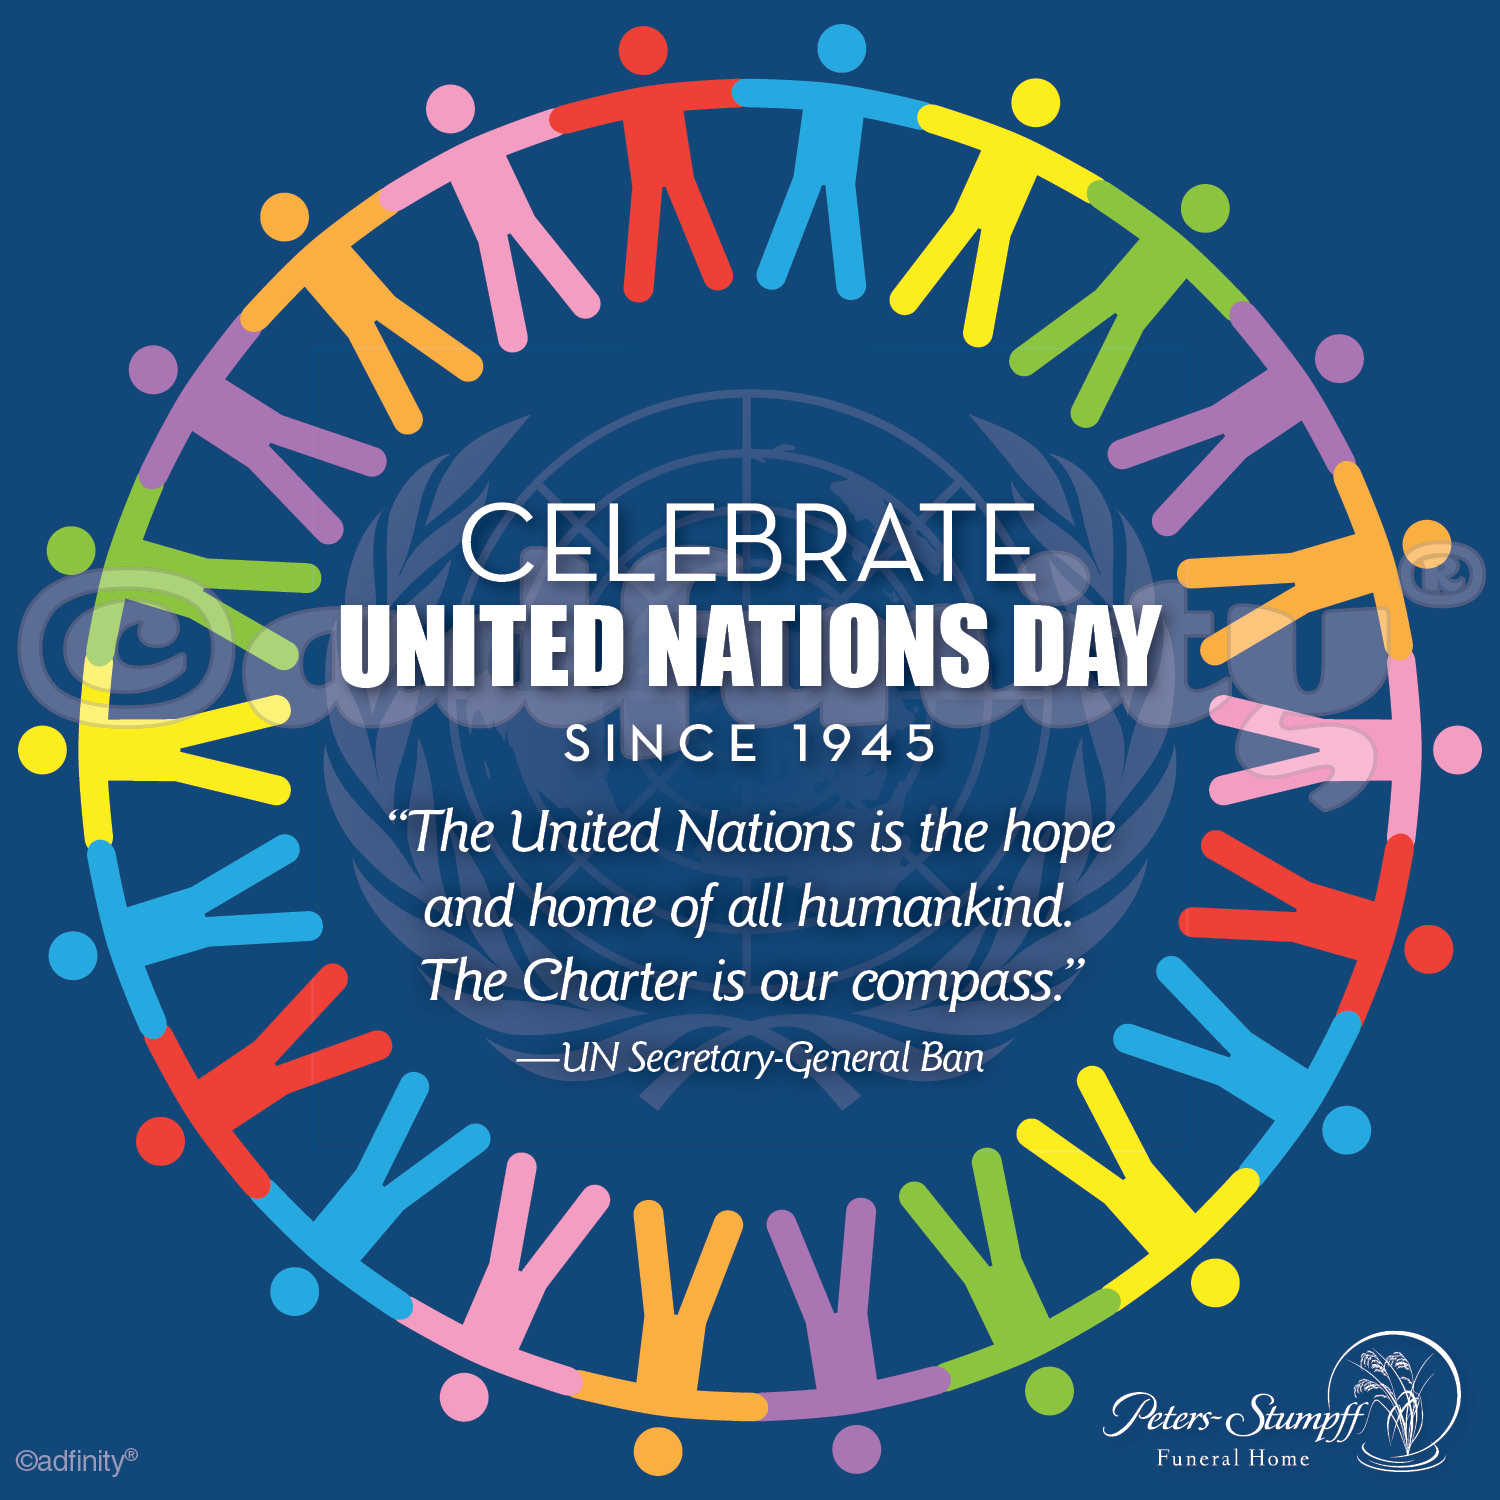 Celebrate United Nations Day Since 1945